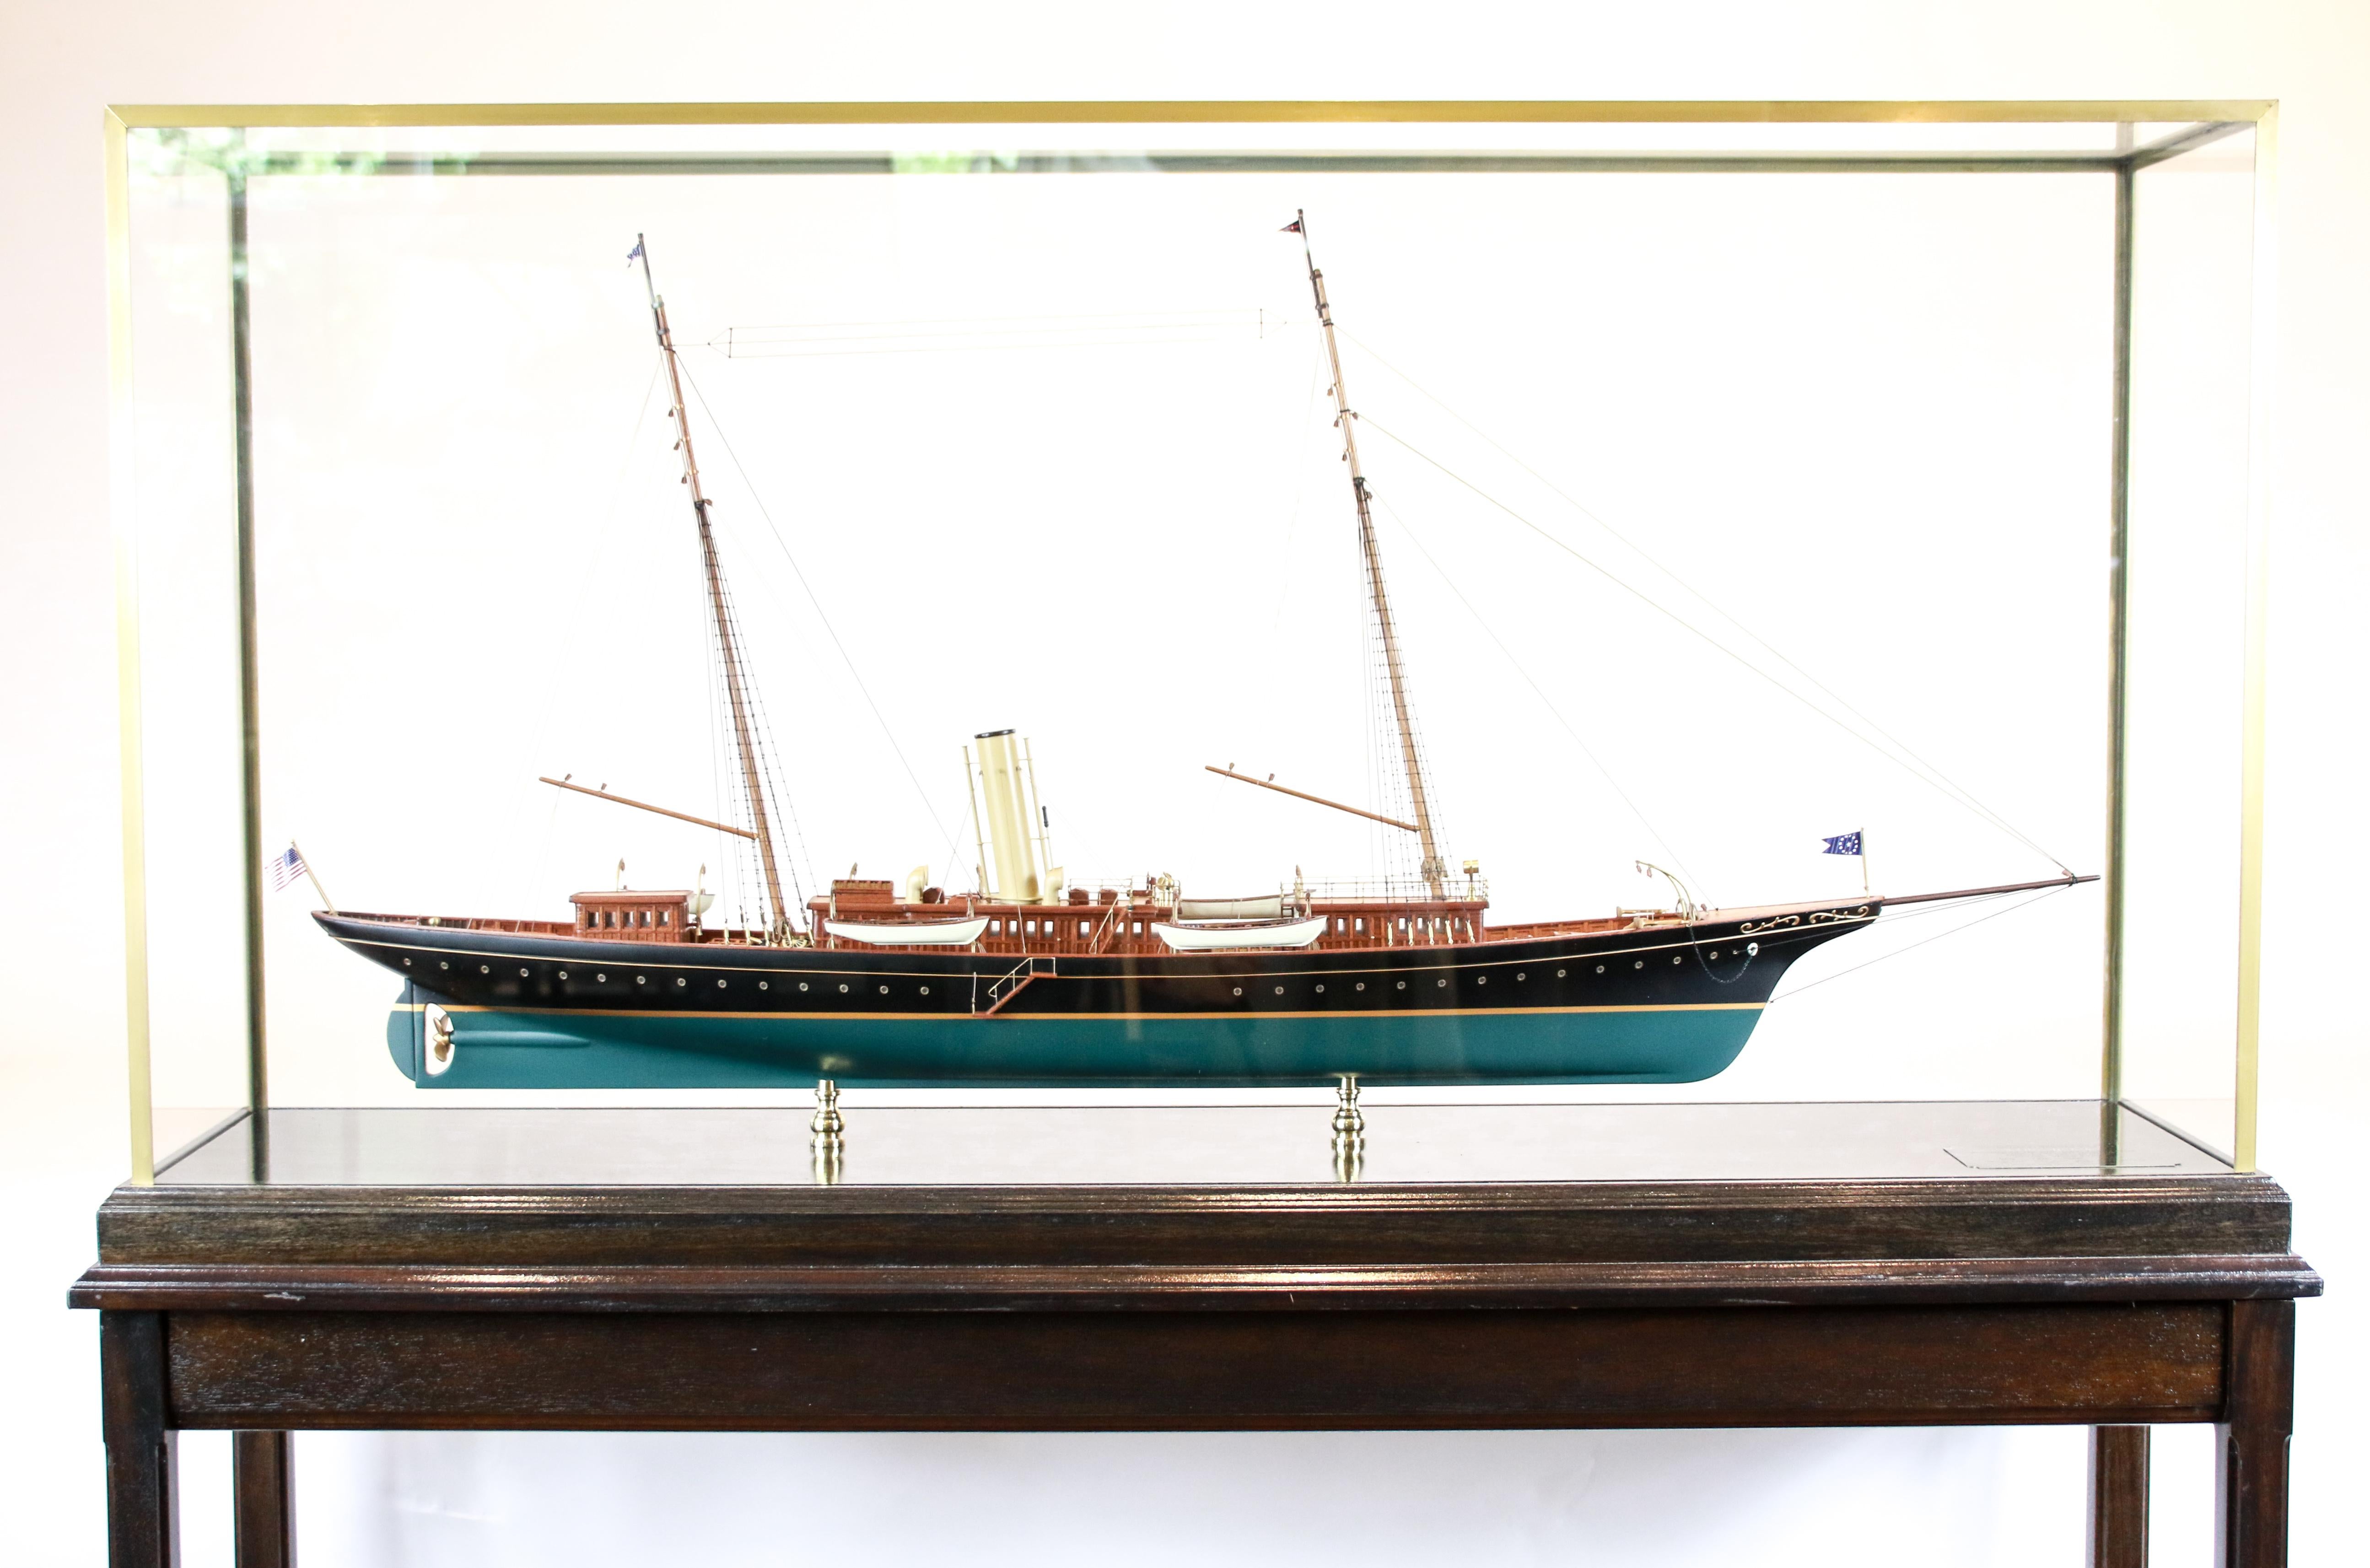 Private steam yacht of J. Pierpont Morgan, Corsair in brass and glass display case with custom wooden table stand.
Many fine details include capstan, helm, binnacle, winch, funnel, lifeboats, portholes, cabins, doors etc.
Morgan commissioned three